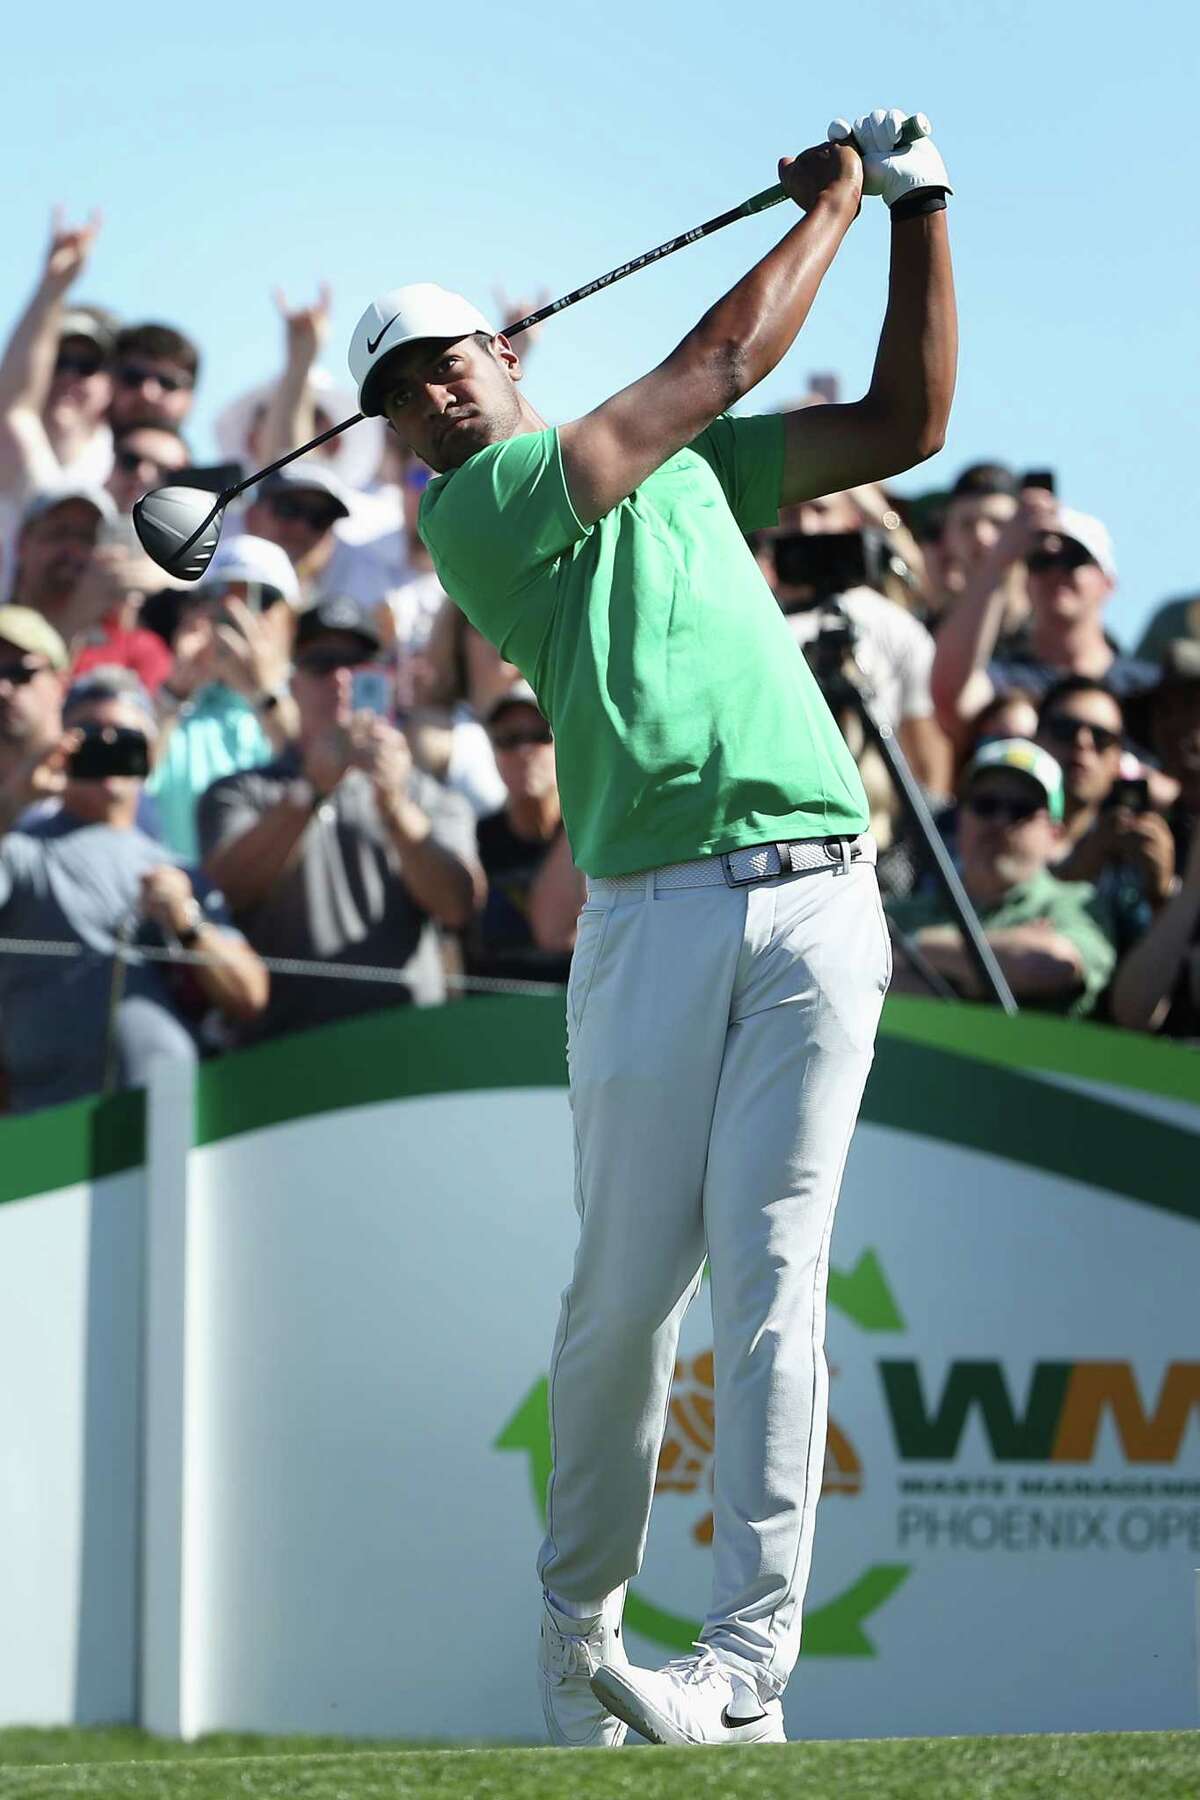 SCOTTSDALE, ARIZONA - FEBRUARY 01: Tony Finau plays a tee shot on the 11th hole during the third round of the Waste Management Open at TPC Scottsdale on February 01, 2020 in Scottsdale, Arizona. (Photo by Christian Petersen/Getty Images)